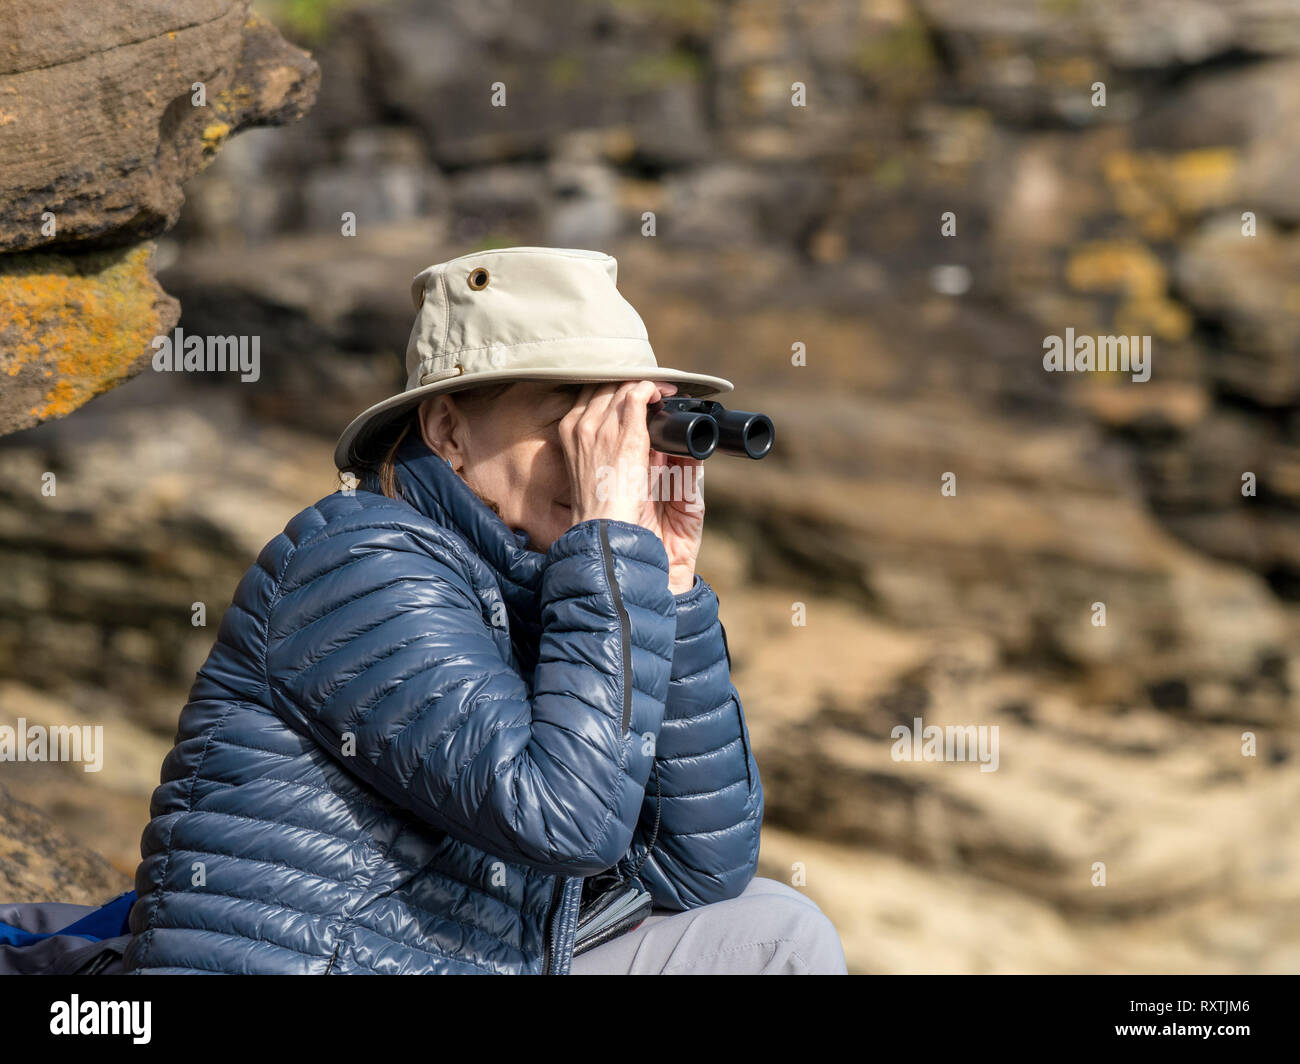 Adult woman wearing sunhat and padded puffer jacket looking through binoculars wildlife watching with rocky cliffs behind, Isle of Skye, Scotland, UK. Stock Photo